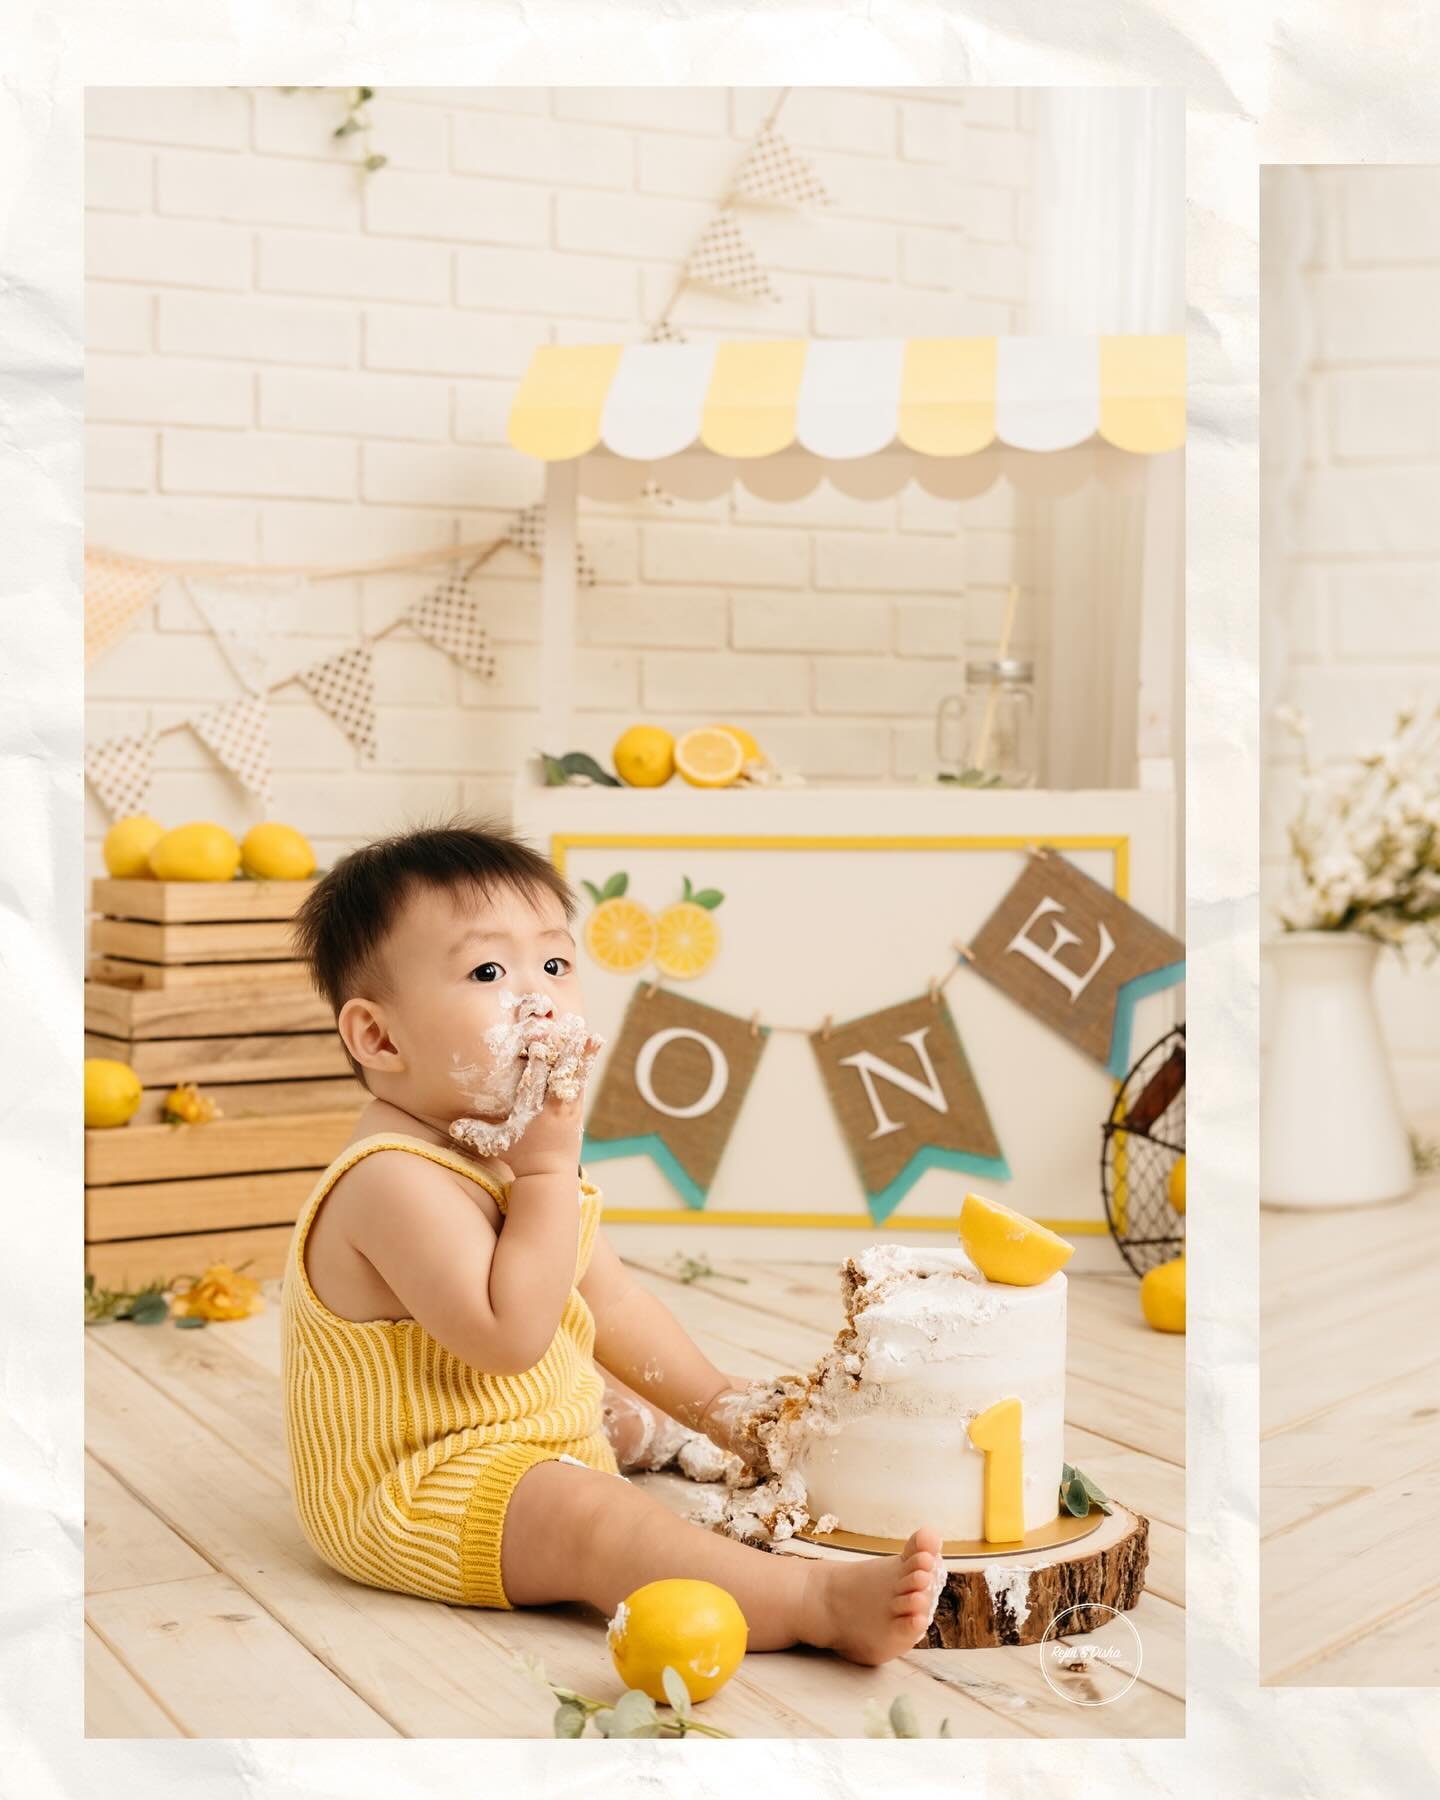 Sour or sweet, these little ones make every moment a treat! 🍋💛 From their first bites to their cutest smiles, our lemon-themed photoshoot captured it all ! 

Dont fancy a cake smash?? we can have your little ones play with the lemons and give us th